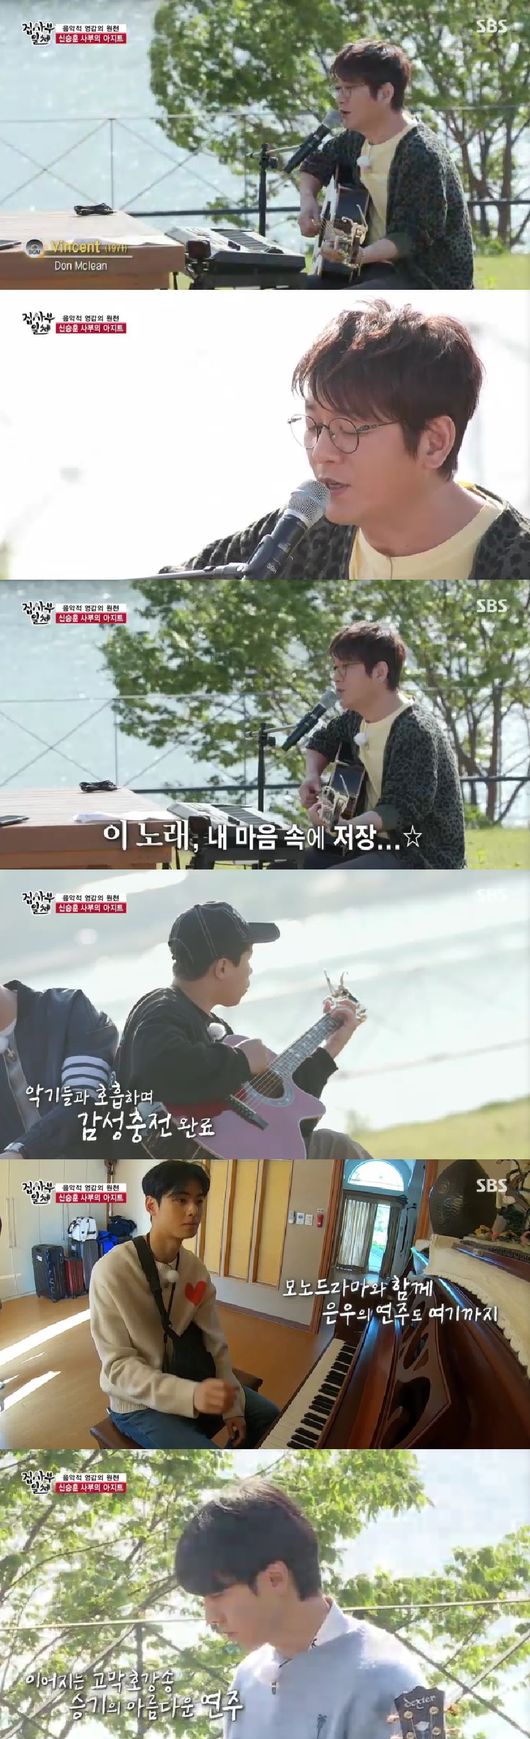 Shin Seung Hun opened the Song Camp by showing off the aspect of the composer Shin Seung Hun regardless of genre.Shin Seung Hun was a master at SBS entertainment All The Butlers broadcast on the 17th.On the day, the production team prepared five ice boxes, saying, There are things that my master ordered. He gave a hint that only one of them contained the preparations.The master said, Please come back well. The production team said, You can open one box only if you have more than 90 points on the karaoke device.At this time, Donghyun, who has experience in operating a coin karaoke room, said, You have to look at the color well, match the beginning and end color.The selection was made by the production team to select it directly with the master and meaningful song, and Lee Seung-gi showed a flex saying, Even if you call it roughly, it will come out 100 points.Yang Se-hyeong said, What if I do not? He made a bet with Lee Seung-gi.The first song was selected by Seo Taiji and the childrens I Know: Shin Sung-rok was the frontrunner, and was intoxicated and enthusiastic in those days.But a score of under 90 came in with 85 points, which Shin Sung-rok said was so exciting that he made him laugh.The next song was selected by Cho Yong-pils Kilimanjaros leopard and Yang Se-hyeong took the microphone.Lee Seung-gi said, Its serious, but its not funny, and predicted it was tong editing angle. No wonder Yang Se-hyeong scored 35 points to make everyone laugh.Next was BTSs Poetry for Small Things. Kim Dong-Hyun fired back at Jung Eun-woo, but was navelled for a dismal move.On the other hand, Jung Eun-woo continued to play with a refreshing voice and finally scored 100 points.Jung Eun-woo was delighted to we did it and Yang Se-hyeong laughed at Kim Dong-Hyun and said, The more you open it, the better it comes.Finally, the box was released, and Kim Dong-Hyuns icebox was filled with only microphones and cards.Next was Wonder Girls Telmy selected.Lee Seung-gi and Yang Se-hyeong were hard-carrying, but they scored 85 points because of their female keys. Members got hints saying Lets show it once.Lee Seung-gi, who was in the game, picked up the debut song My Girl in the match against Yang Se-hyeong, who had a dinner party saying, I knew her emotions.It was a charming luxury ballad of the aided national brother.All of them were expecting, but they scored 97 points, and Yang Se-hyeong won the dinner and Lee Seung-gi won the dinner.The production team said, We have introduced the top ranking songs for the longest time in the history of popular songs so far. It is the master who was listed in the Guinness Book of Records for 14 weeks, surpassing these records. Cho Yong-pil and Seo Taiji also exceeded the class, .Jung Eun-woo, the first singer to exceed 17 million cumulative sales, said, Can idol generations now achieve Million Sellers?Among them, Shin Sung-rok and Lee Seung-gi headed to the recording studio with the master, saying, My generation knows.It was singer Shin Seung Hun, who won the title of Koreas first national singer; Legend, who didnt need words, and Shin Seung Hun, the ballad emperor.Lee Seung-gi was pleased to meet him, saying, Ive been a master Ive wanted to serve since last year. All expressed their expectations, saying, Im happy with Ballard Legend.I looked at the records of Master Shin Seung Hun.Shin Seung Hun said that he was invisible love for the 14th consecutive week, and he showed it with the piano on the spot and played live live.When all responded hotly, Shin Seung Hun expressed satisfaction with the members response, saying, There are many hits besides this.Shin Sung-rok surprised everyone by mentioning that Shin Seung Hun, who is one of the 30th anniversary, I heard about 800 songs in the computer.Shin Seung Hun released a folder with singer names, opening a 10 billion-worth Pandora box.Shin Seung Hun released it, saying it was a song that I wrote directly but it didnt suit me: it was a Composer Shin Seung Hun figure hidden by the singers image.I do not stick to my familiar color and try to match it with the musician.Inside the folder was a Jeff Bridgesburnet song.Shin Seung Hun, who calls Jeff Bridges Burnett his brother, said he asked for a song with a message, and said there was an unpublished song for Jeff Bridges Burnett.Lee Seung-gi, who listened to this, expressed interest, saying, I have not signed yet.Shin Seung Hun introduced various songs in addition to this.The members were surprised by the unpublished song, Jung Eun-woo also danced and the solo seems to be cool.The recordings were made into a masterpiece and all of them were open to the public. Shin Seung Hun was very proud of the hard release.Yang Se-hyeong released a humming recording, attracting attention to the song work, and Shin Seung Hun resuscitated Melody immediately.Everyone was surprised, saying, Its ridiculous. He expressed humility, saying that it was rather a reward for Yang Se-hyeong, who overcame shame and took out the recordings.The voice and keyboard were enoughLee Seung-gi also said that he should worry about whether to focus on the highlight without musical instruments, and Shin Seung Hun said, I was worried about 15 years ago. The commitment to the basics gives the greatest resonance.He also said that he would make a song if he recorded it for a moment, and all showed interest.Shin Seung Hun said, I leave the pension for music work. He said that there was a excitement in a new place.All that was seen arrived at a pension that became a source of inspiration.I think the music will rise more by myself, he said, admiring the azit of Master Shin Seung Hun.Jung Eun-woo had a melody on the piano in the pension; he breathed with the instruments, filled his emotions, and Shin Seung Hun peaked with a guitar and a voice.It was a concert by Shin Seung Hun for only five people.Shin Seung Hun said, I did not blow the wind, but I feel like Im moving even if I stay still. It is time to concentrate on the music surrounded by nature for a while, leaving the fierceness of everyday life.I listened for a second and played Shin Seung Huns famous song.With the heat rising hot, Shin Seung Hun even handed down the writing method for girls fans to admire.The members then set their ears before planting and continued the correct answer march.At this time, Shin Sung-rok heard only one  and hit You in the Smile.It was a moment when I proved that I was a chump fan. Shin Seung Hun also said, You are crazy. Turns out that there was a time when I heard you in the smile and cried.Singh Seung-hoon recalled his memories, saying, I received a lot of love from Seoul with this song, the title song of the first album. The song that made me sing on the album and the song that swept the Gilboard chart.Above all, 30 years later, a steady and full voice surprised everyone.Lee Seung-gi said, It is the first time I have heard a song and have never heard it. And Jung Eun-woo also asked if he thought about the muse in the lyrics that inspired him.Shin Seung Hun said, Of course I have a main character, and when I am invisible, I broke up and wrote lyrics.We drove this atmosphere and had time to make our own luxury logo song.Asked about the logo song that the members wanted, all said, I hope I can listen comfortably to anyone, he said. Addiction is important, I hope it is grand, I hope it will be a spleen expression.Shin Seung Hun proved the genre-unrequited Composer Shin Seung Hun class, selecting classical, rock style, and spleen beats.All The Butlers broadcast screen capture